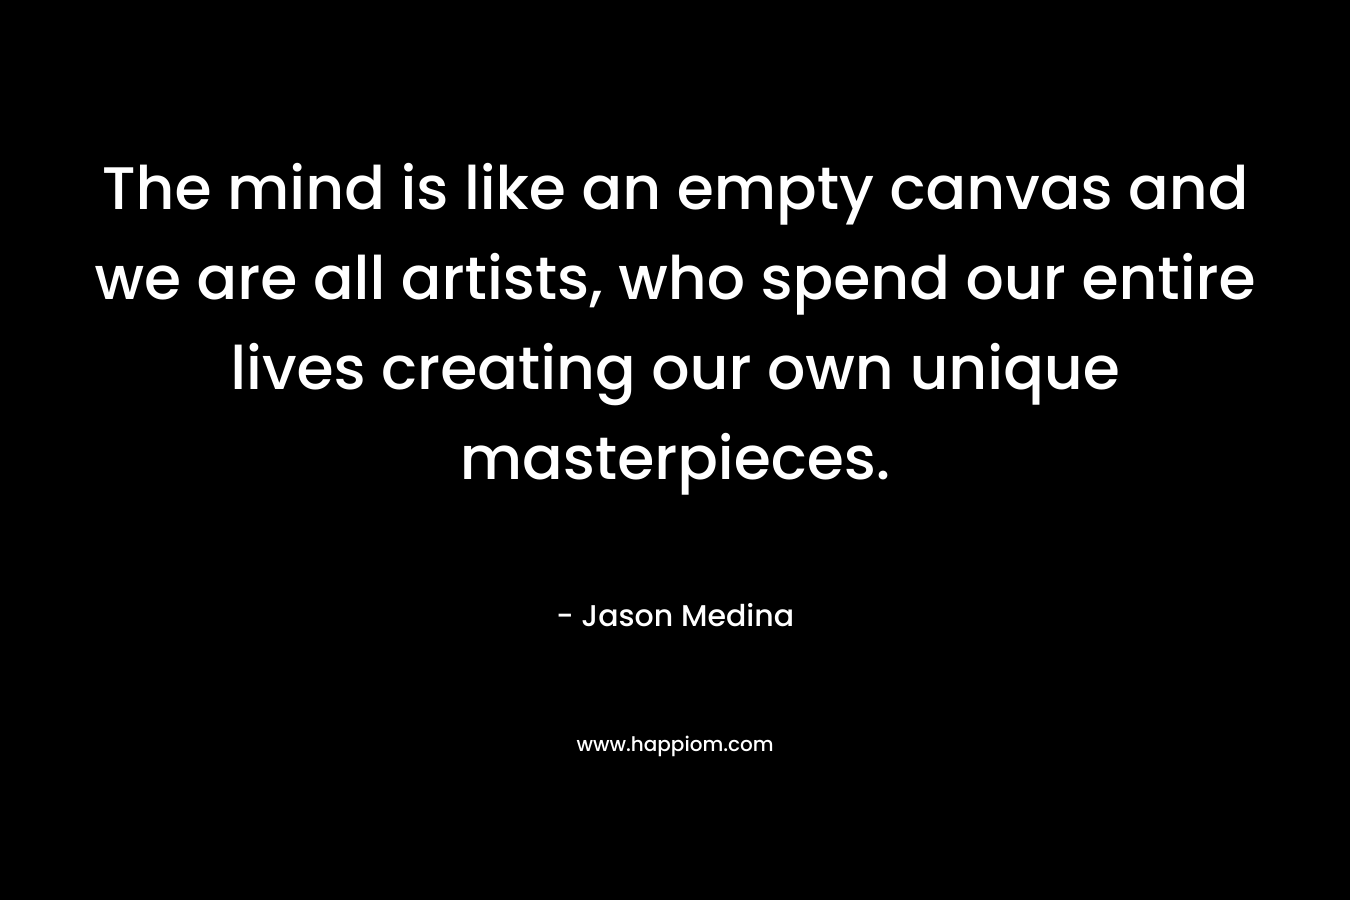 The mind is like an empty canvas and we are all artists, who spend our entire lives creating our own unique masterpieces.